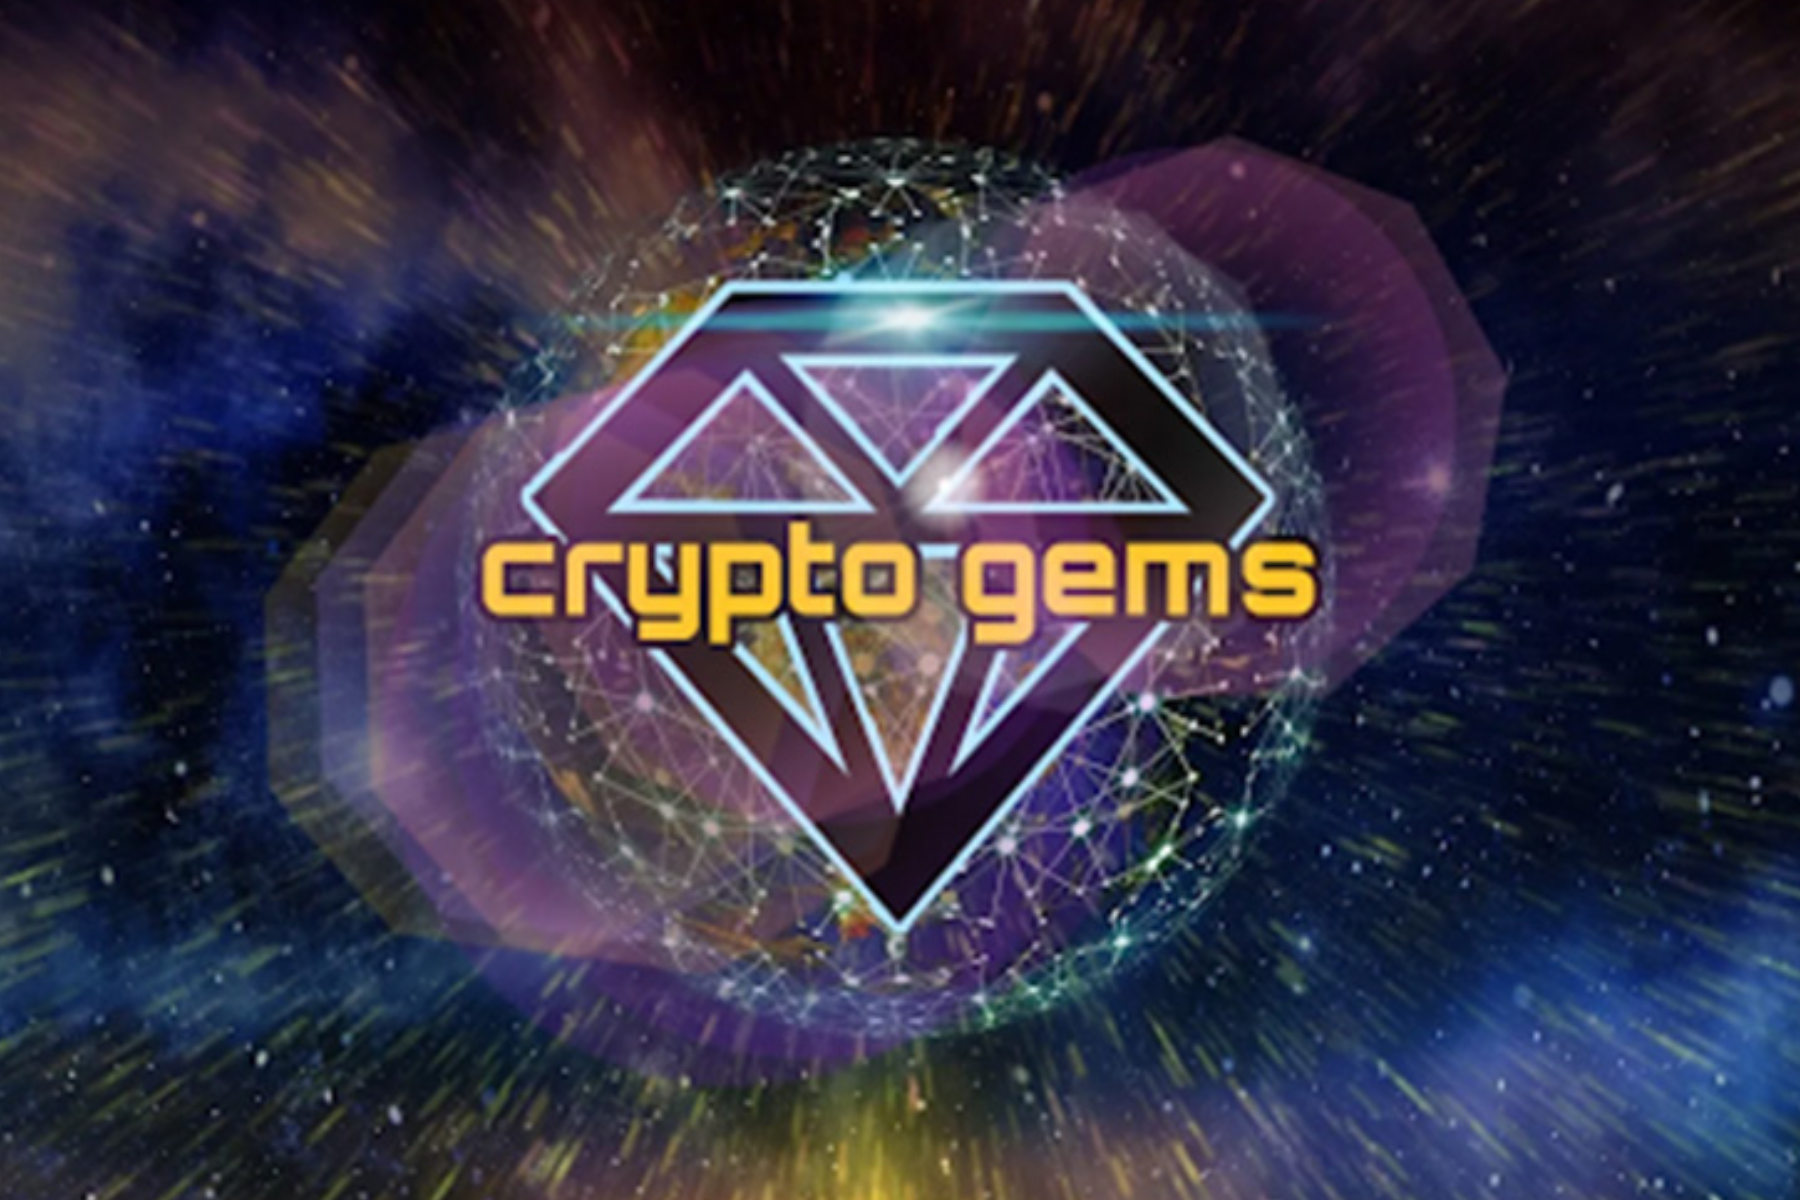 A logo for Crypto Gems featuring the words "Crypto Gems" prominently displayed